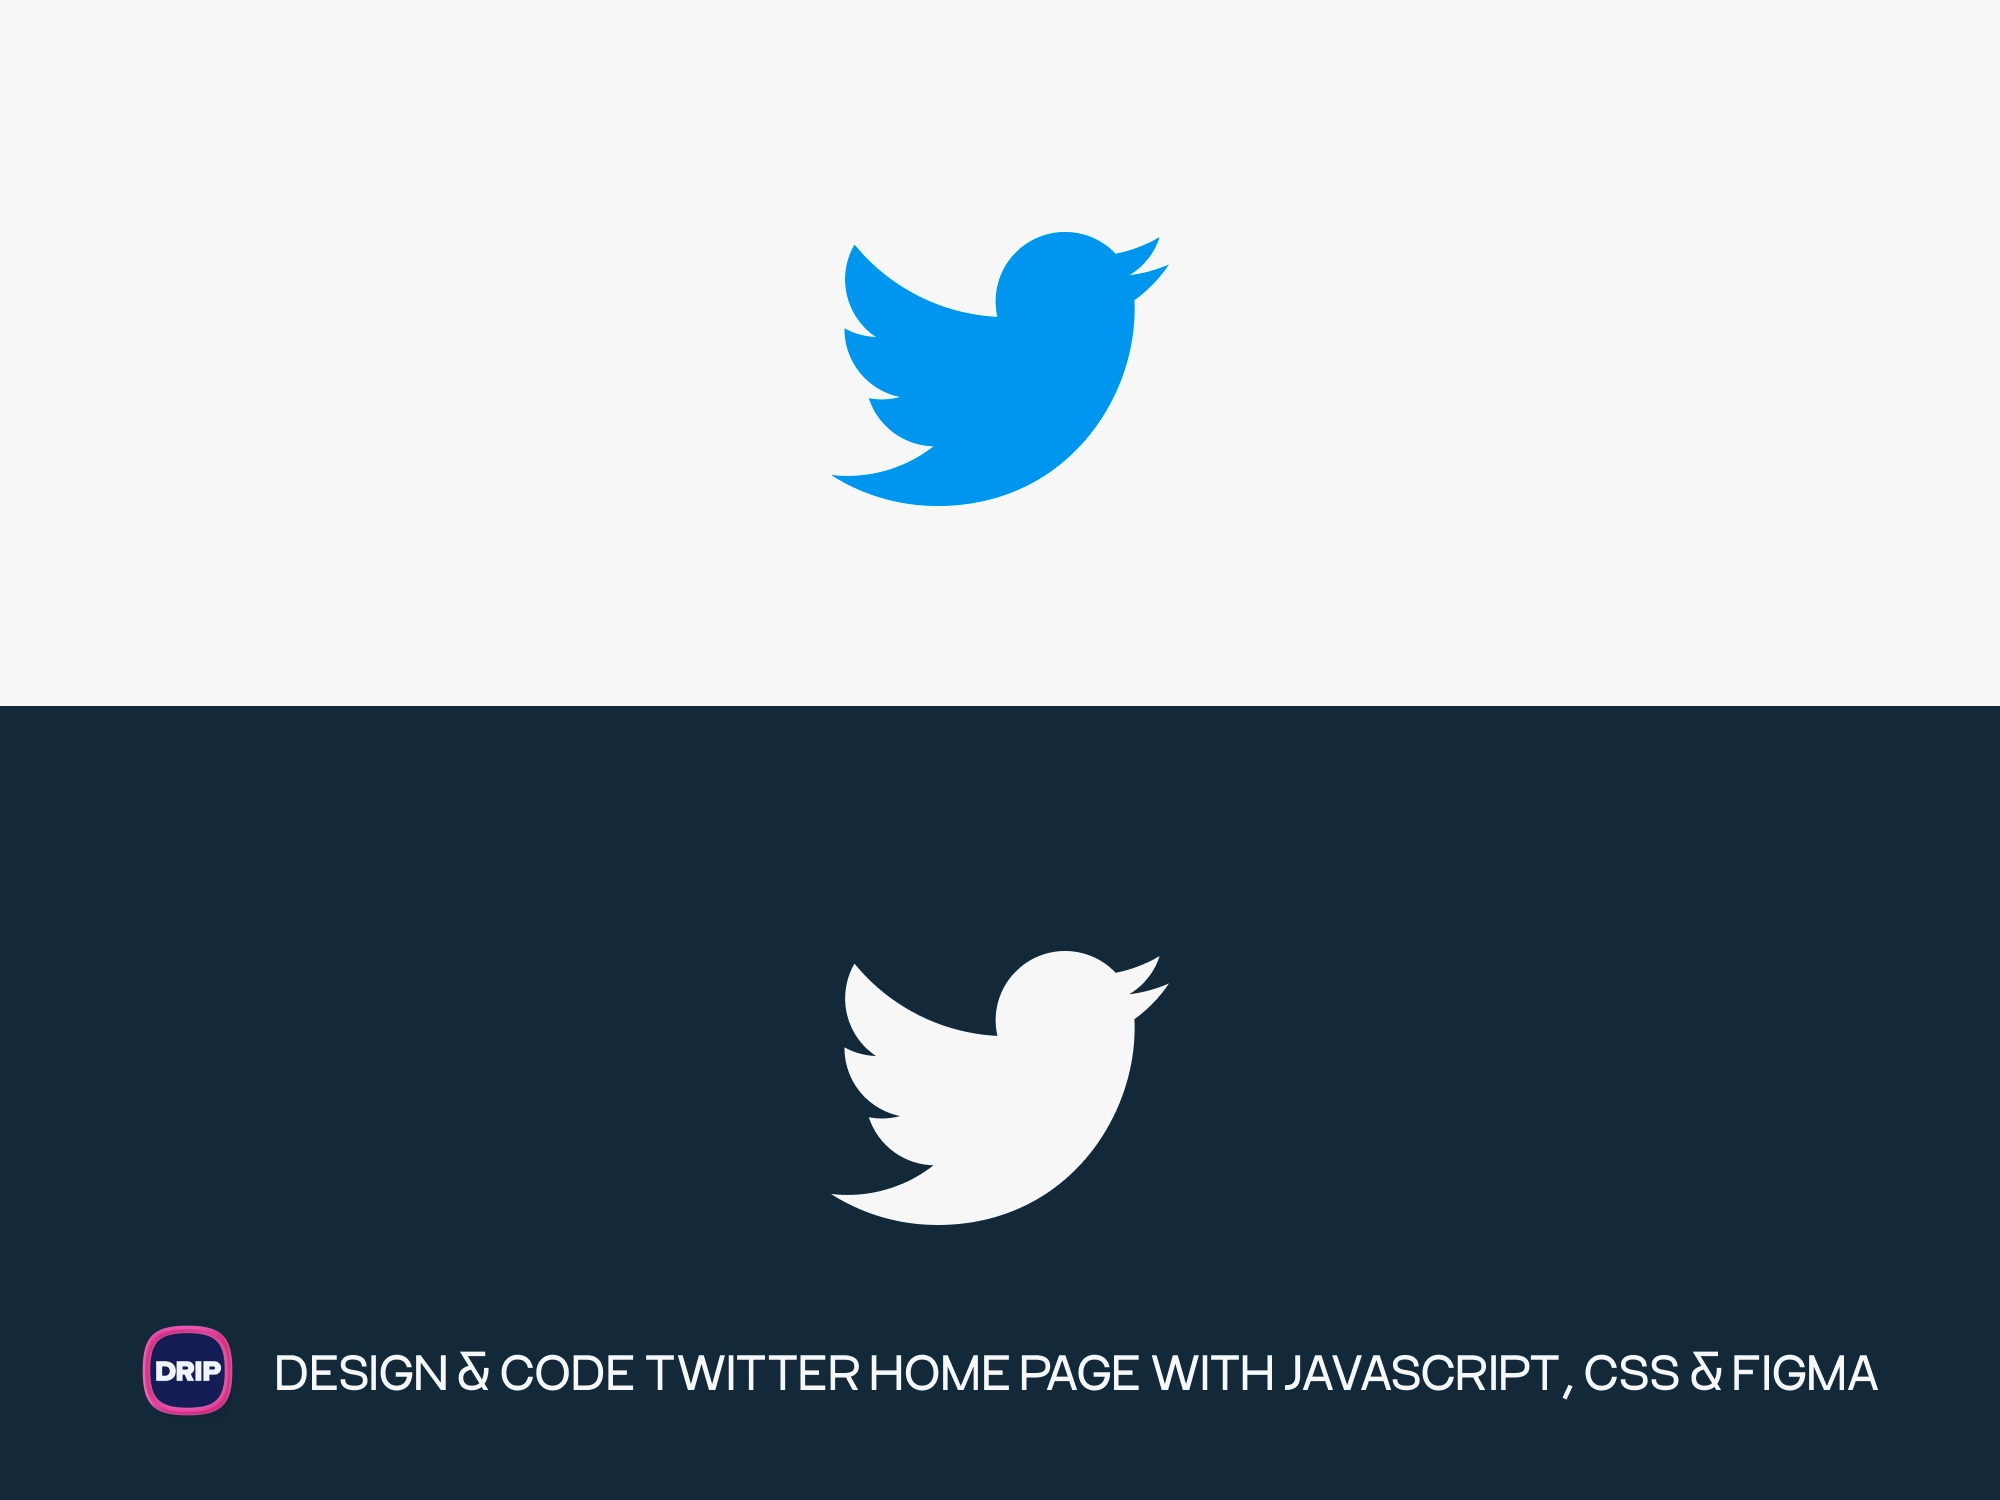 [VIP] Design & Code Twitter Home Page with JavaScript, CSS & Figma